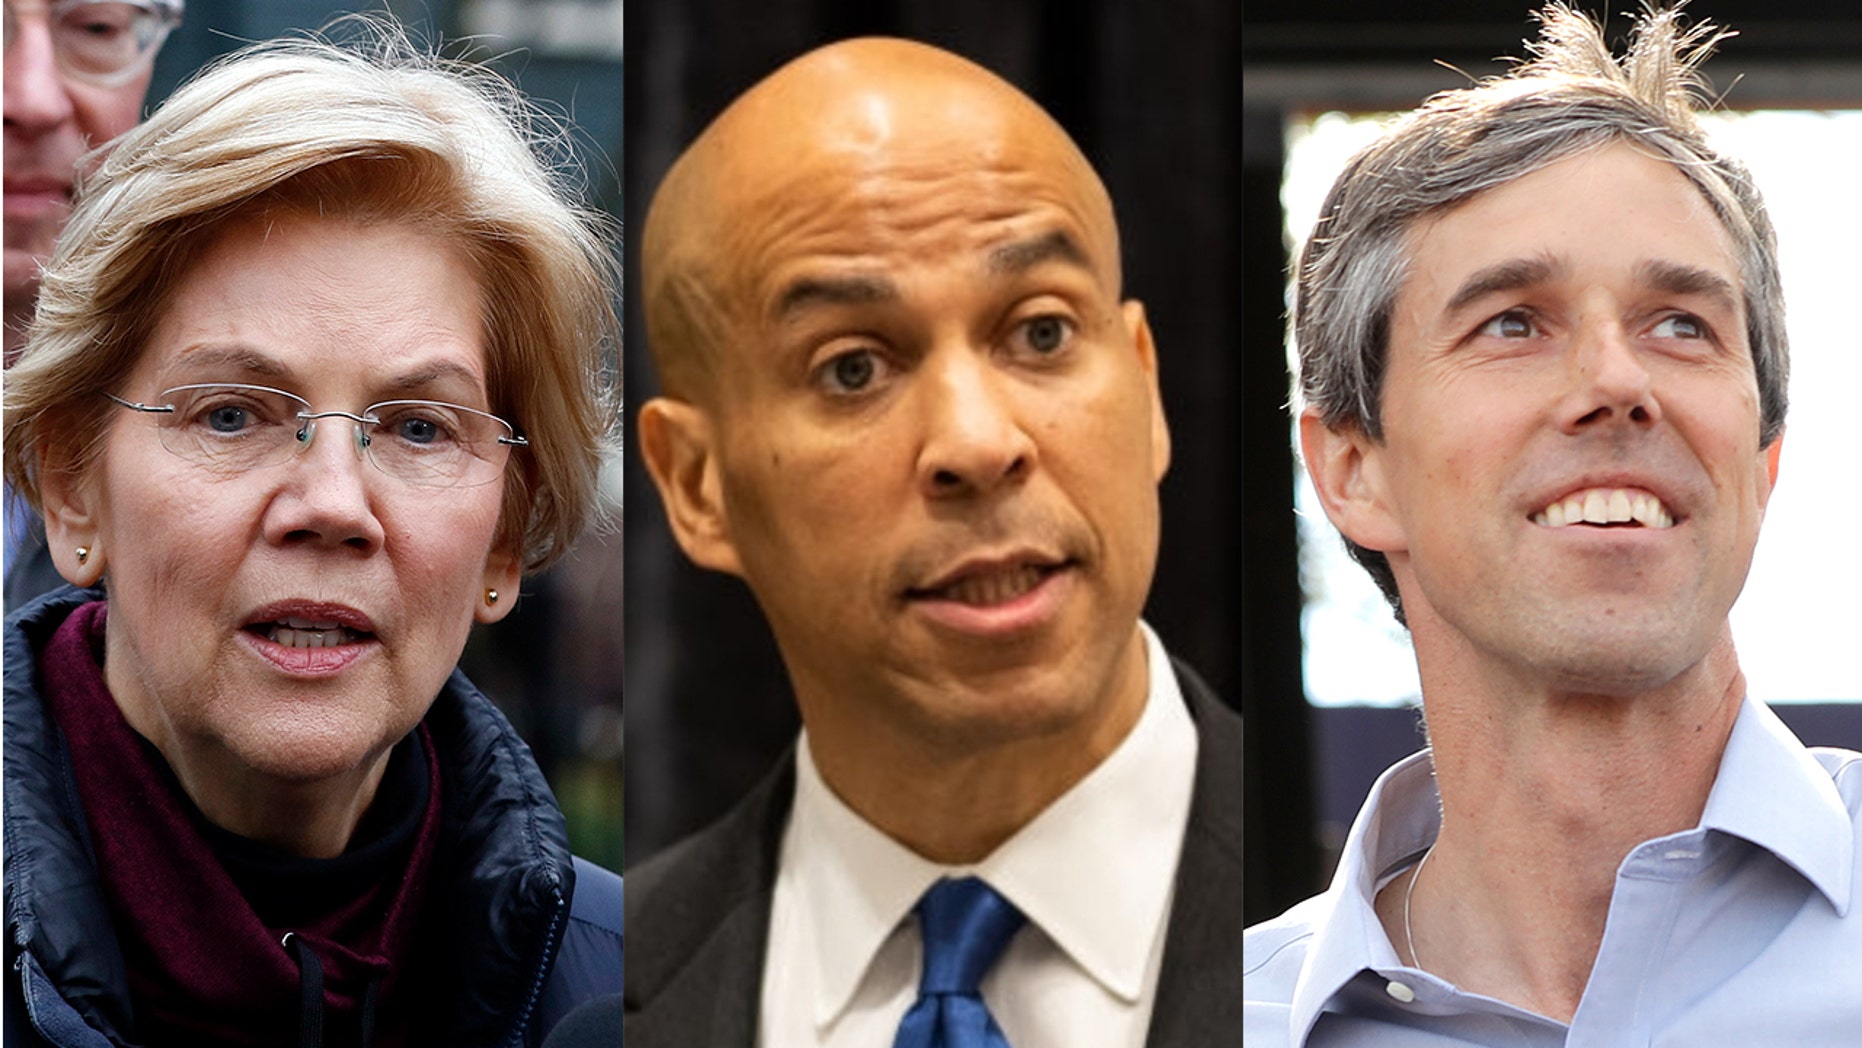 Growing number of 2020 Democrats supporting 